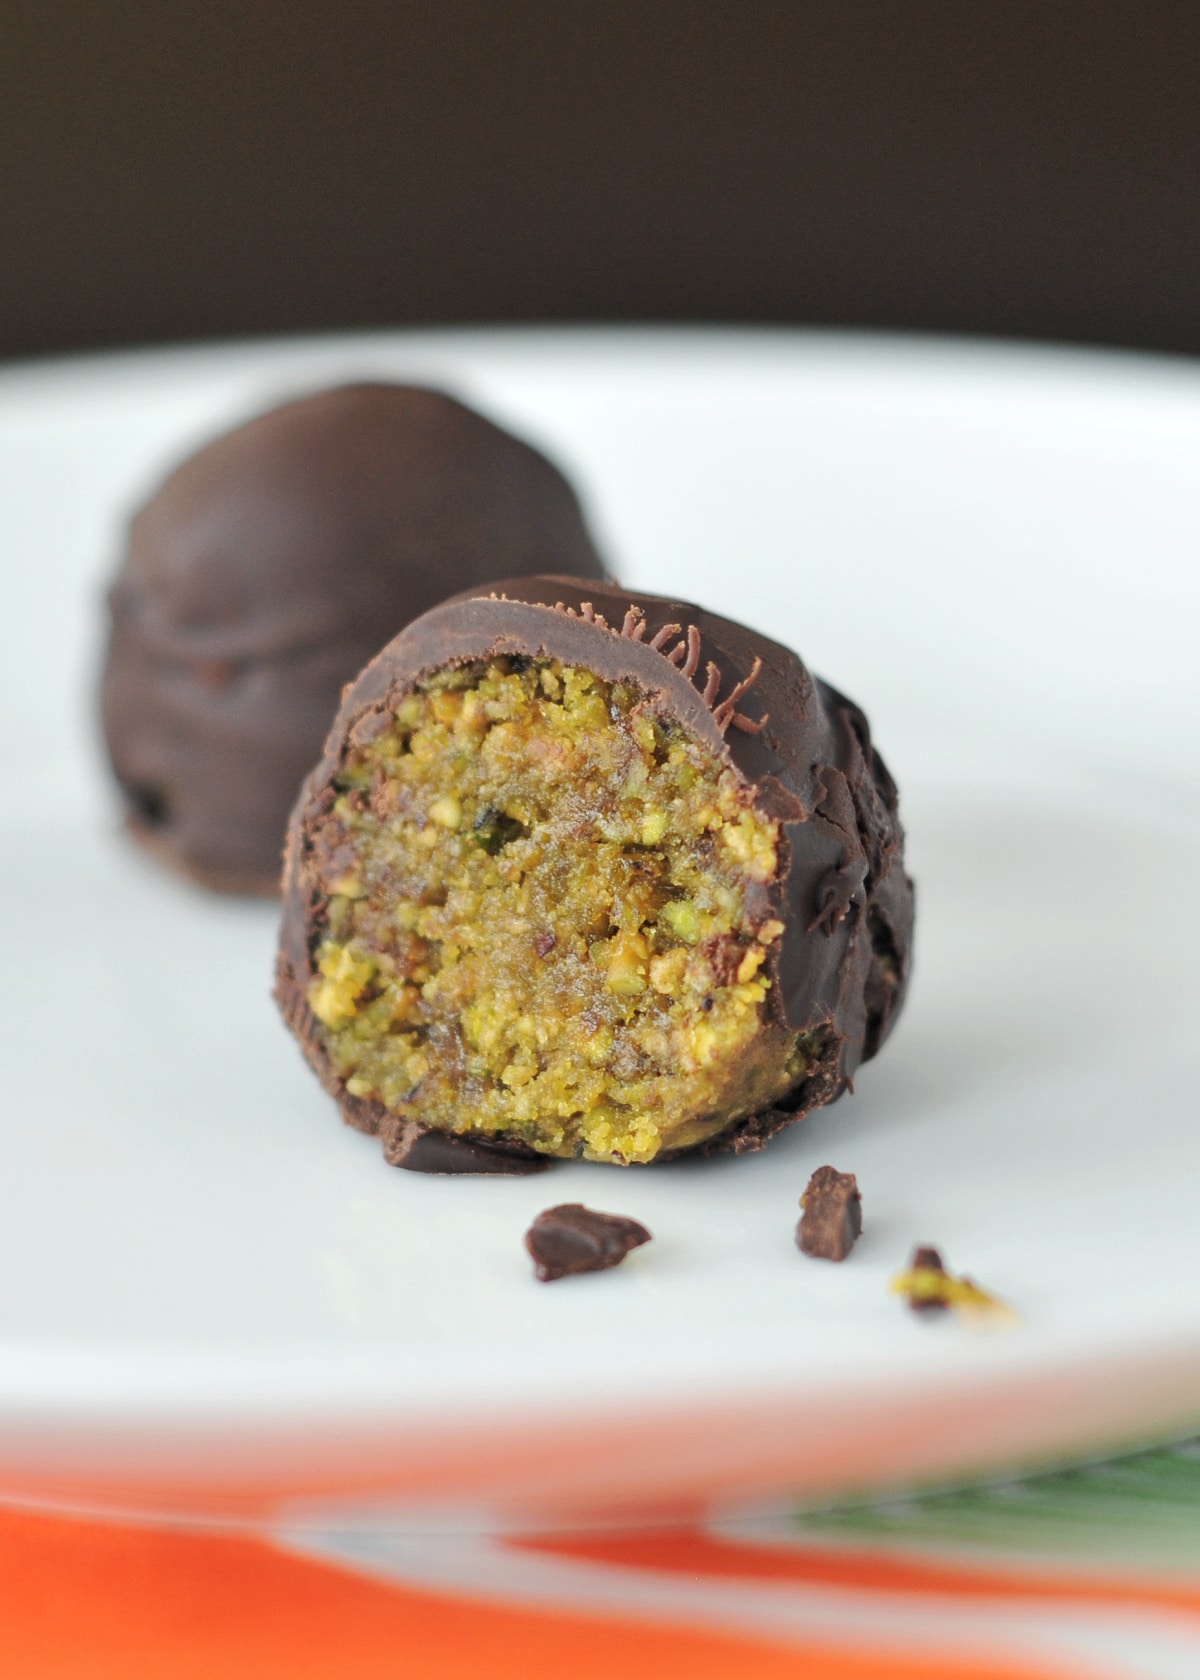 Two chocolate covered pistachio lime balls sit on a white plate; one ball has a slice out of it to show the light green inside.